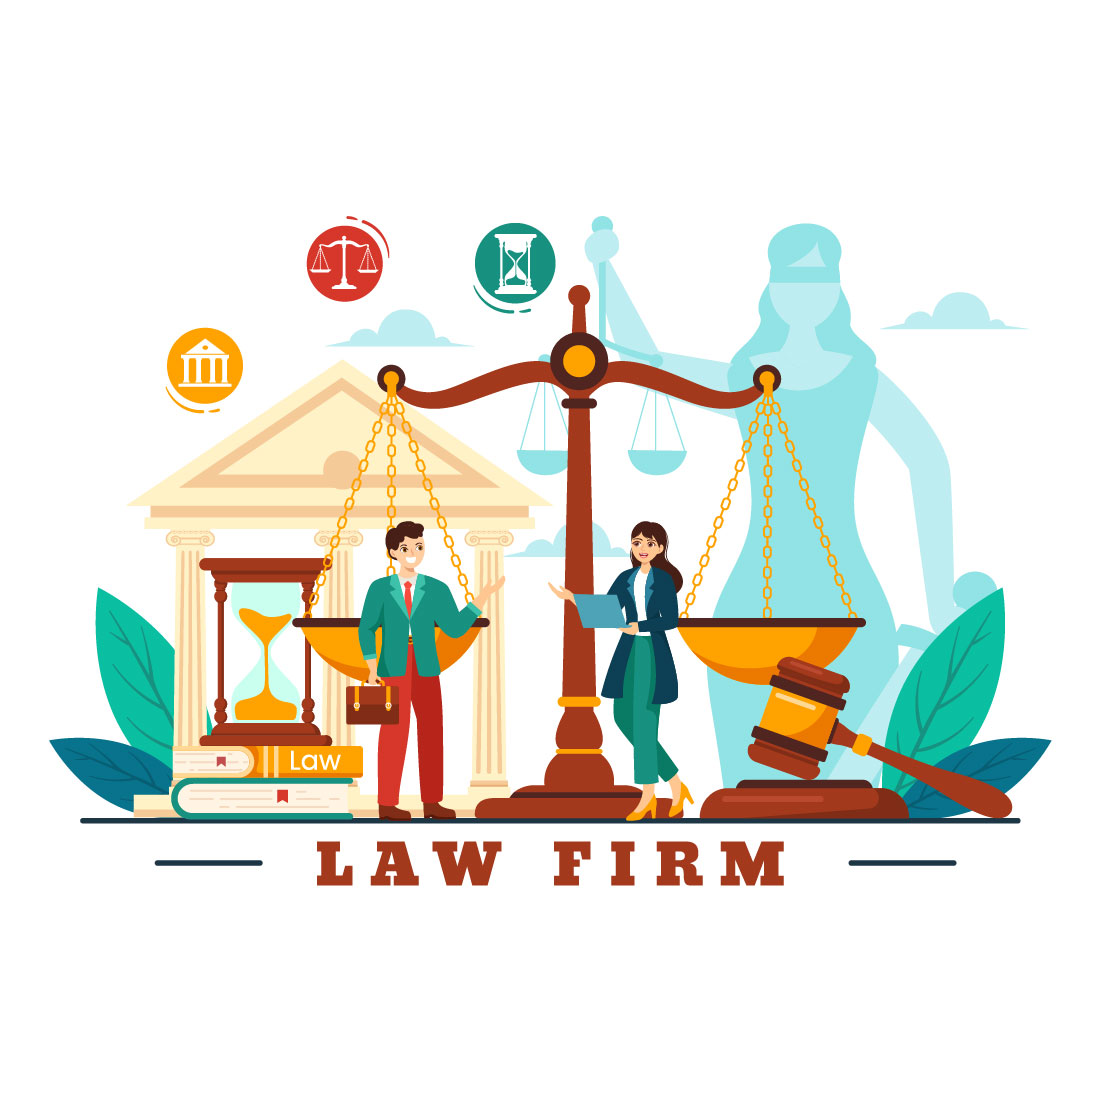 12 Law Firm Services Illustration cover image.